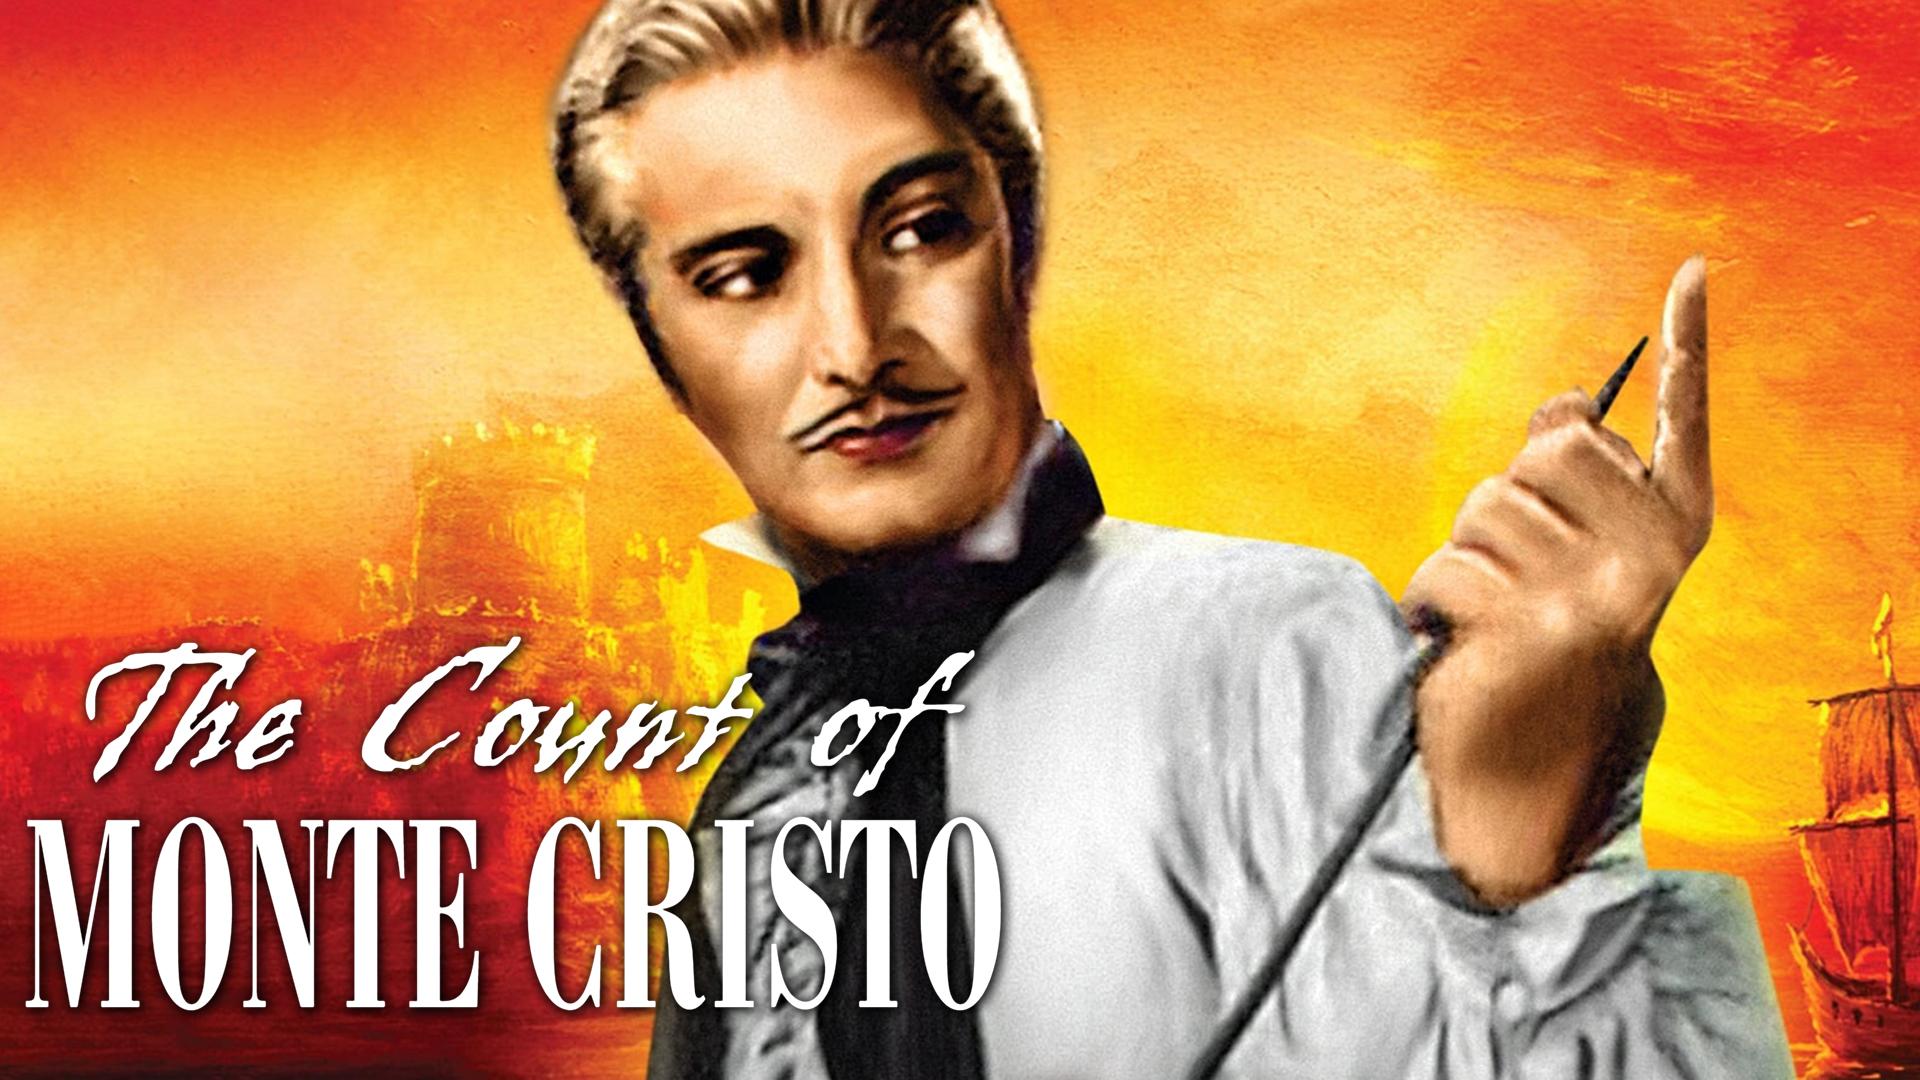 Watch The Count of Monte Cristo Streaming Online on Philo (Free Trial)